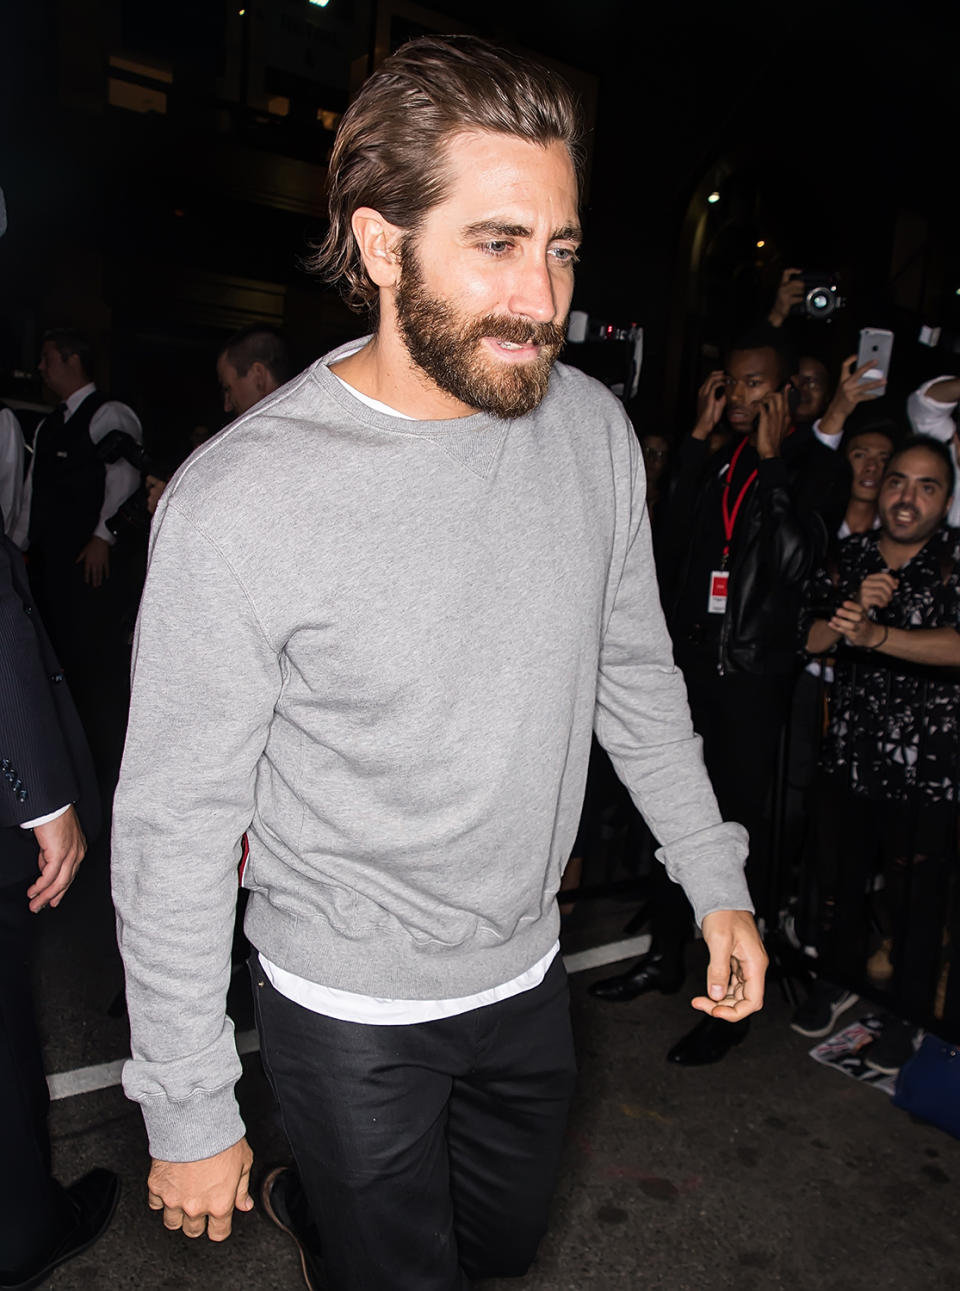 Jake Gyllenhaal at the Calvin Klein Collection fashion show